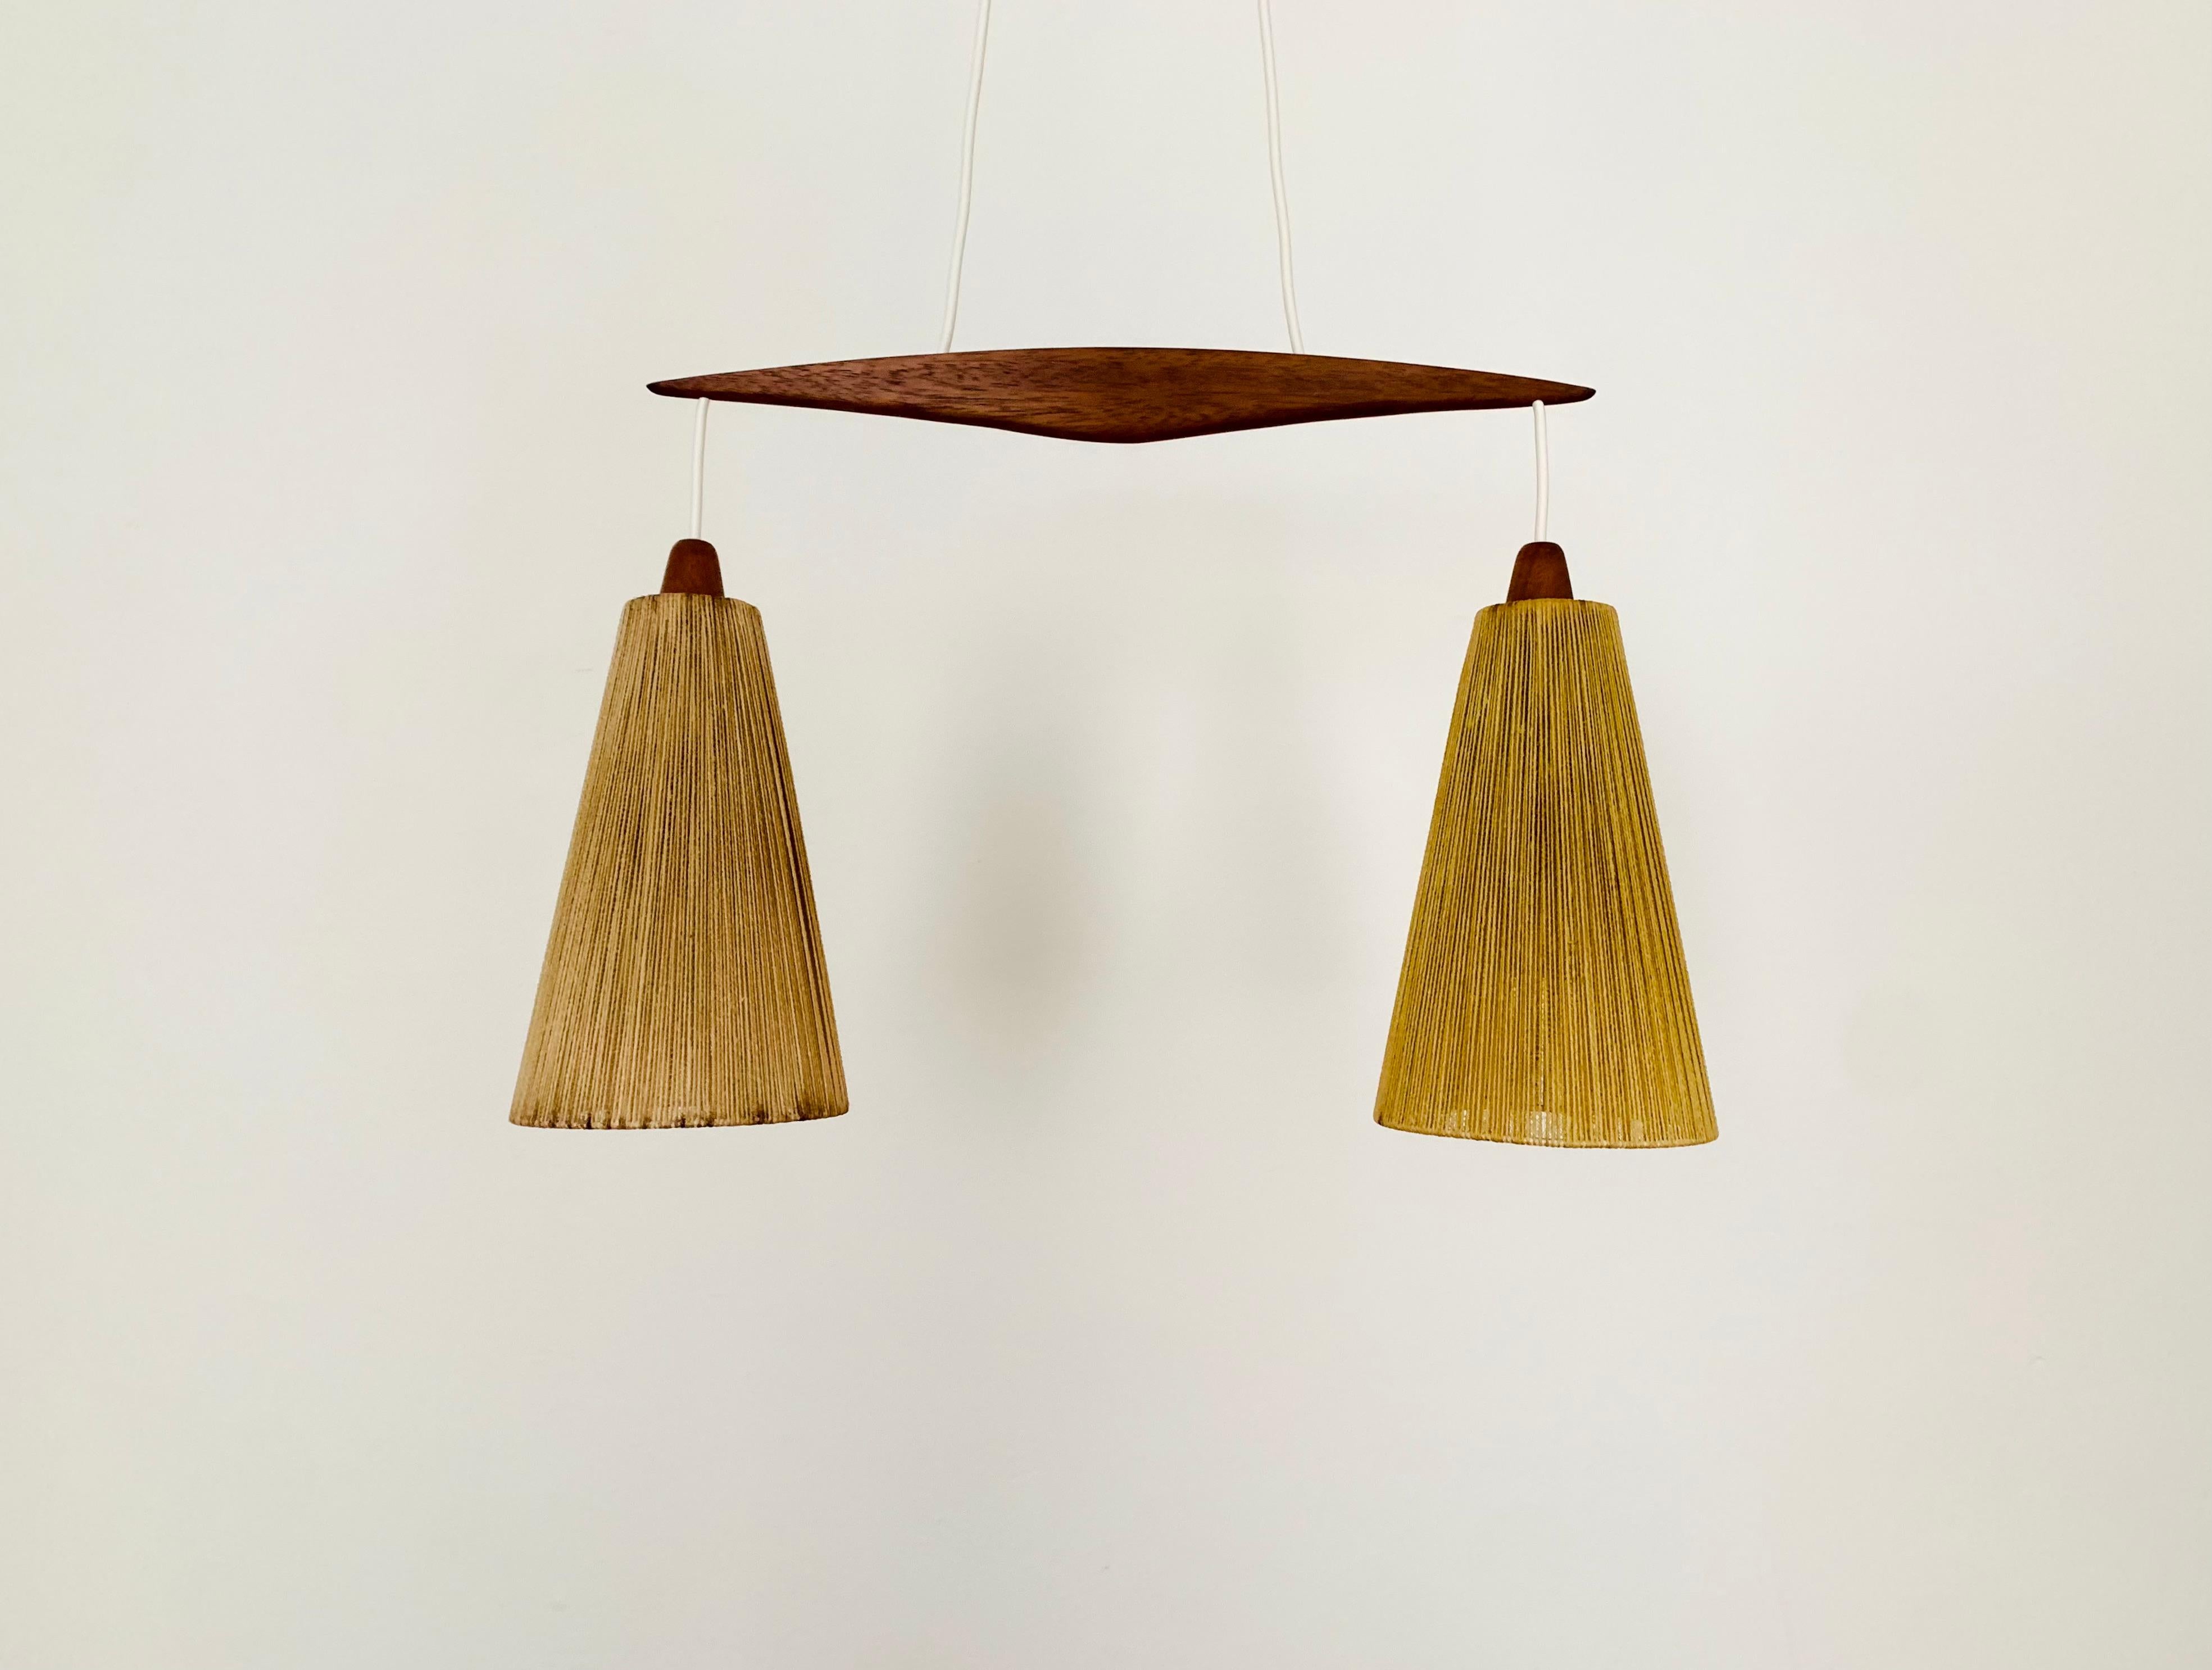 Beautiful sisal pendant lamp from the 1960s.
Great and unusual design with a fantastically comfortable look.
Very nice teak details and high-quality workmanship.
A spectacular play of light is created.

Manufacturer: Temde

Condition:

Very good